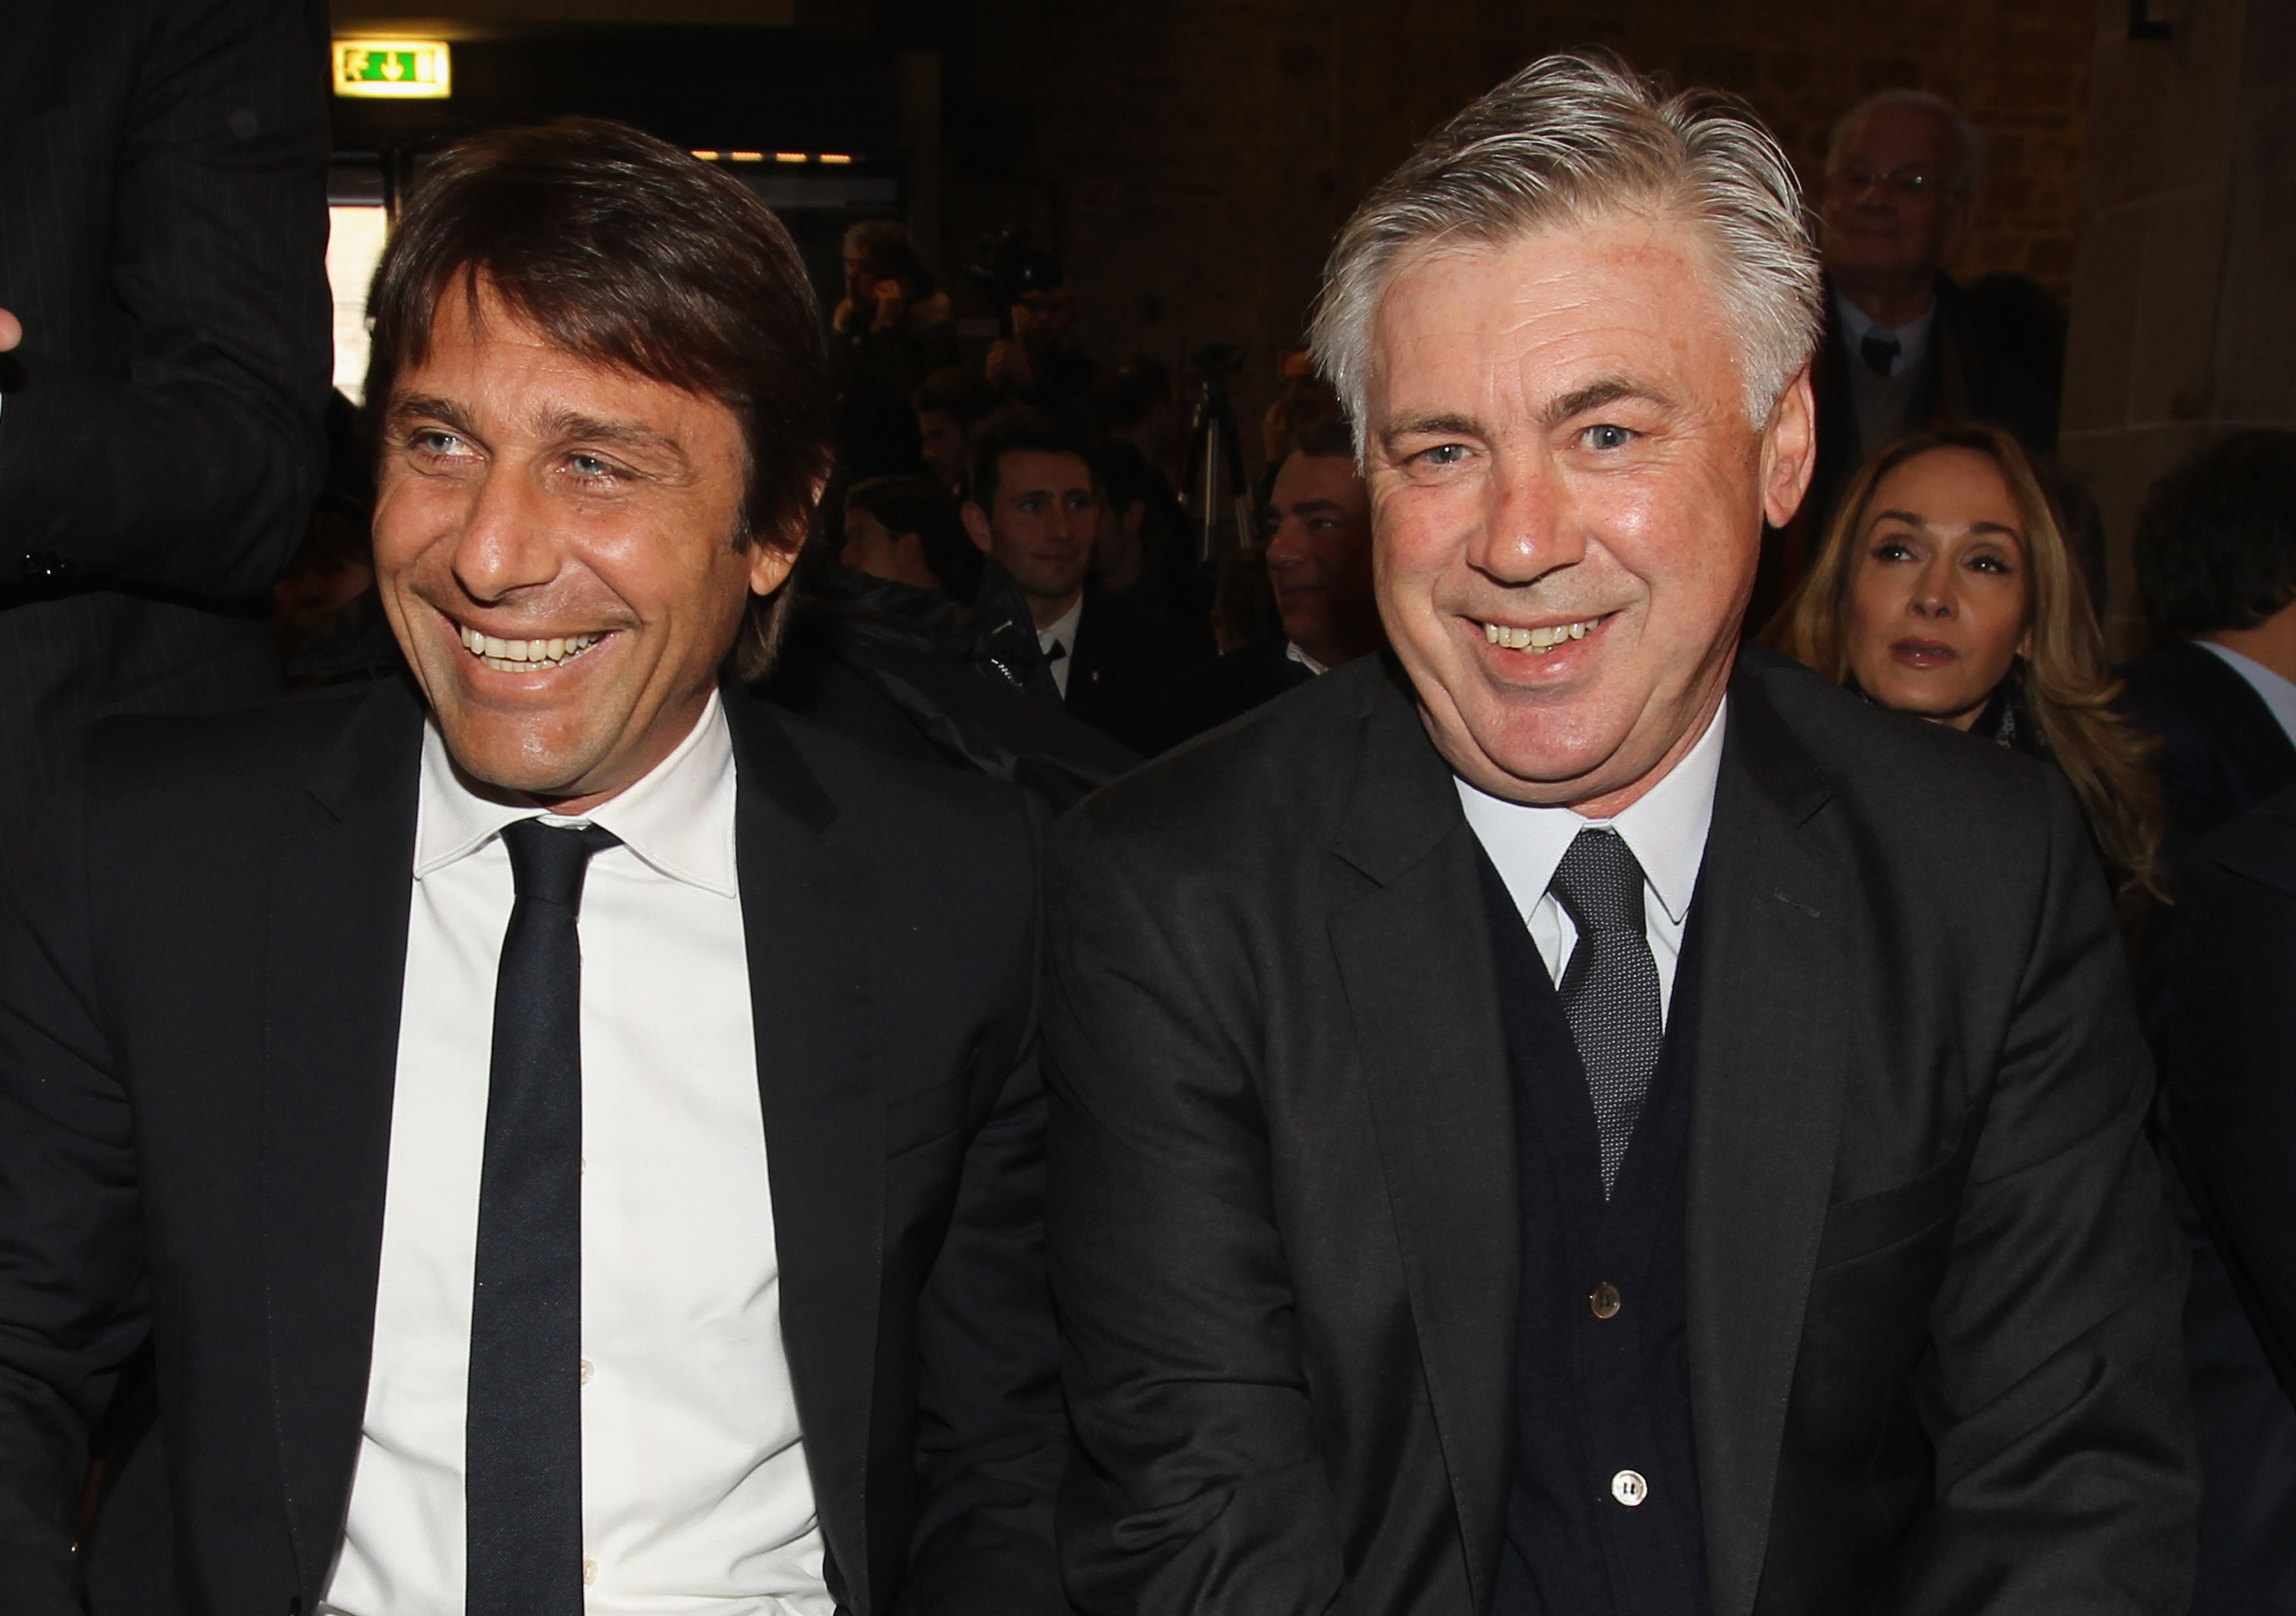 FLORENCE, ITALY - JANUARY 19:  (L-R) Italy head coach Antonio Conte and Real Madrid head coach Carlo Ancelotti attend the Italian Football Federation Hall of Fame Award ceremony at Palazzo Vecchio on January 19, 2015 in Florence, Italy.  (Photo by Paolo Bruno/Getty Images)